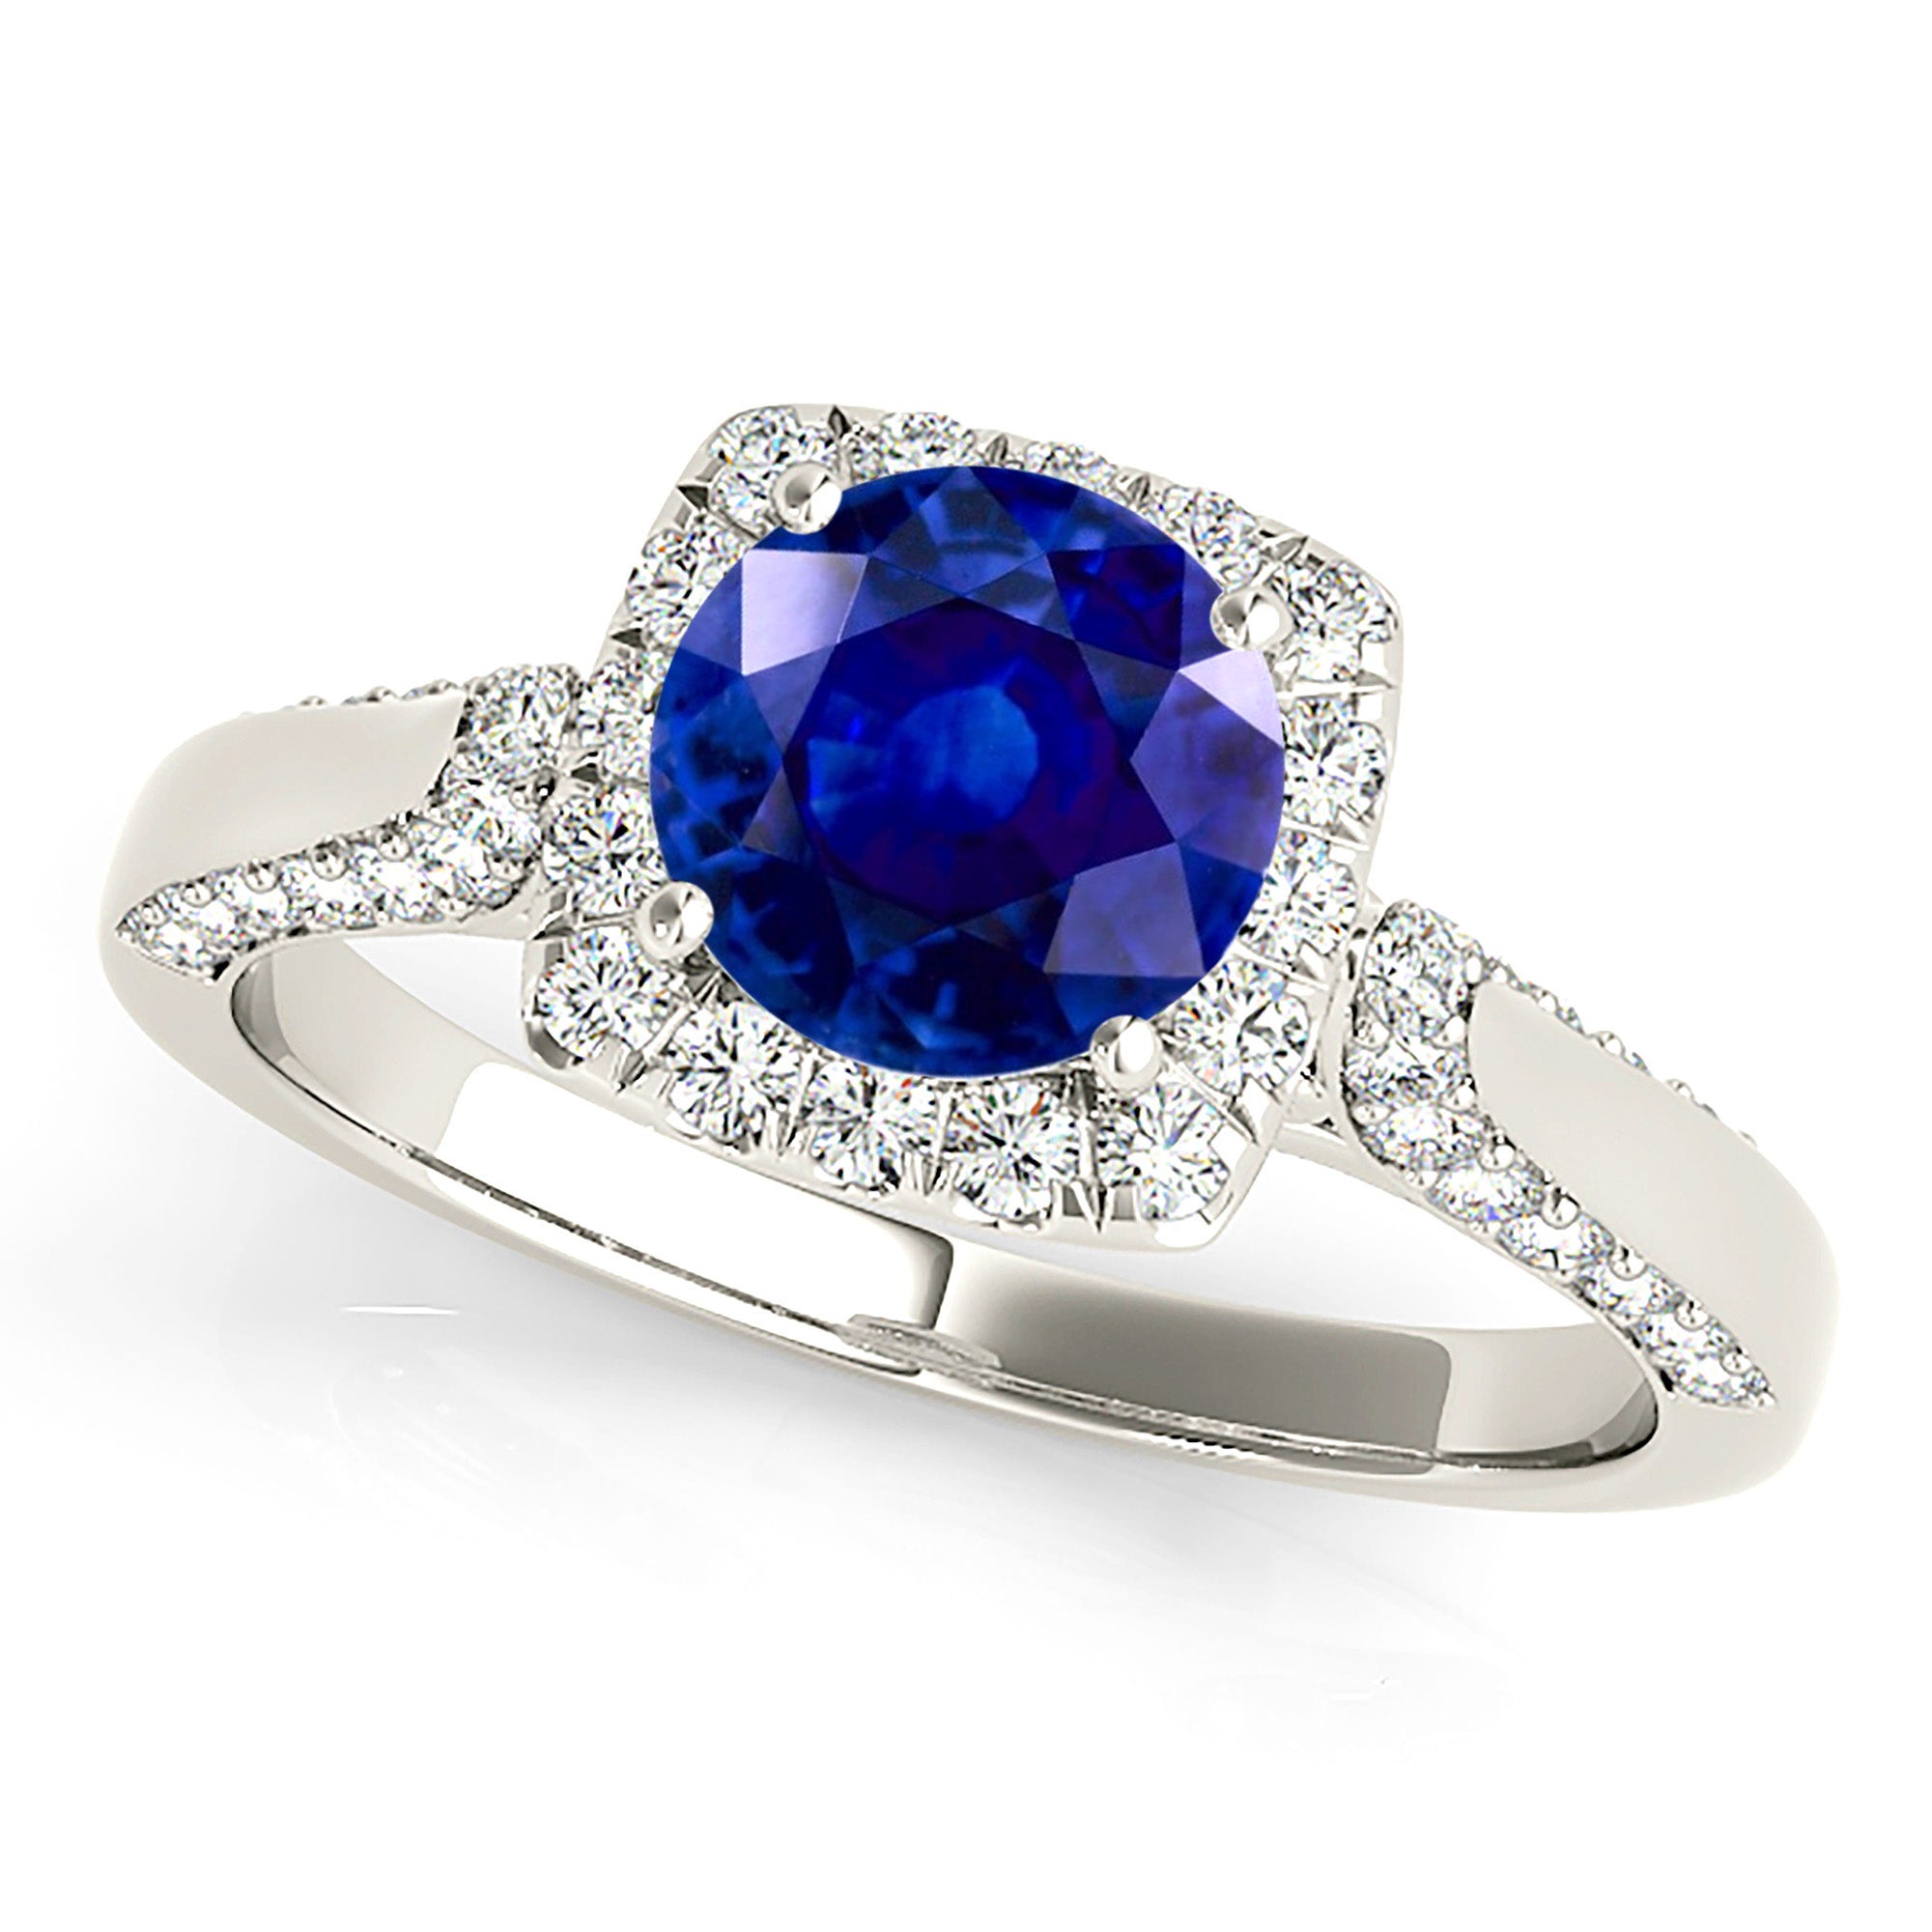 1.80 ct. Genuine Blue Sapphire Halo Engagement Ring With 0.55 ctw. Side and Accent Diamonds-in 14K/18K White, Yellow, Rose Gold and Platinum - Christmas Jewelry Gift -VIRABYANI